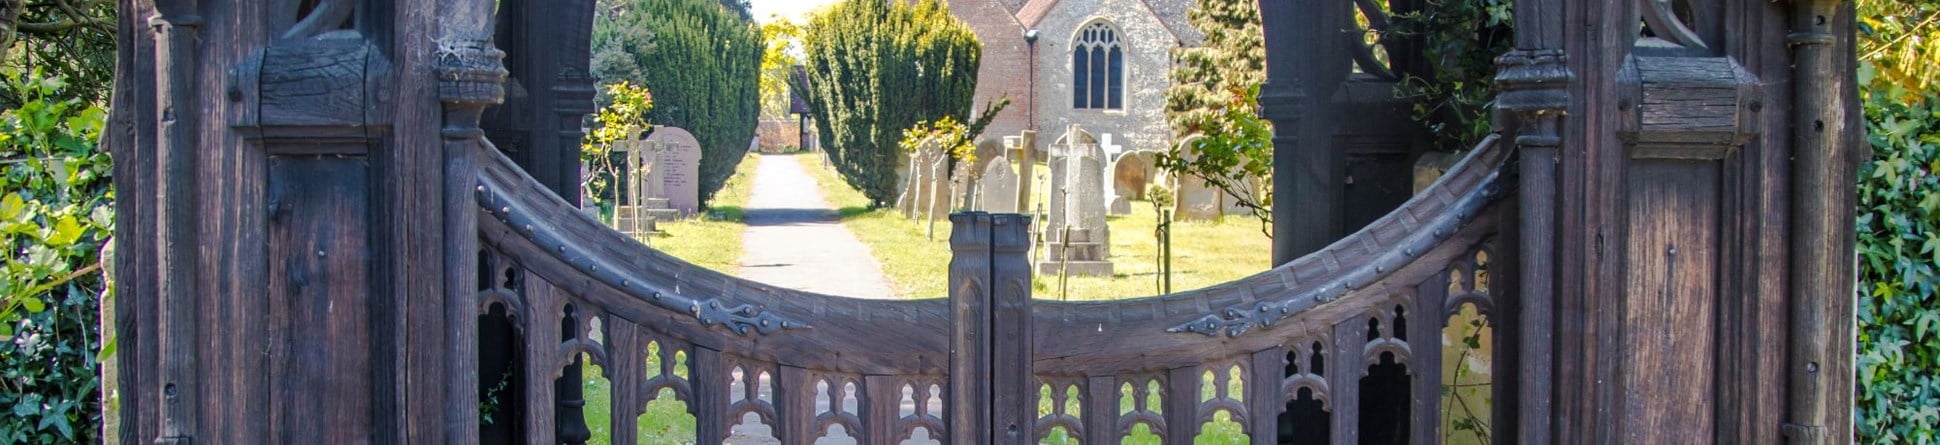 Decorative carved wooden gateway leading towards a church.